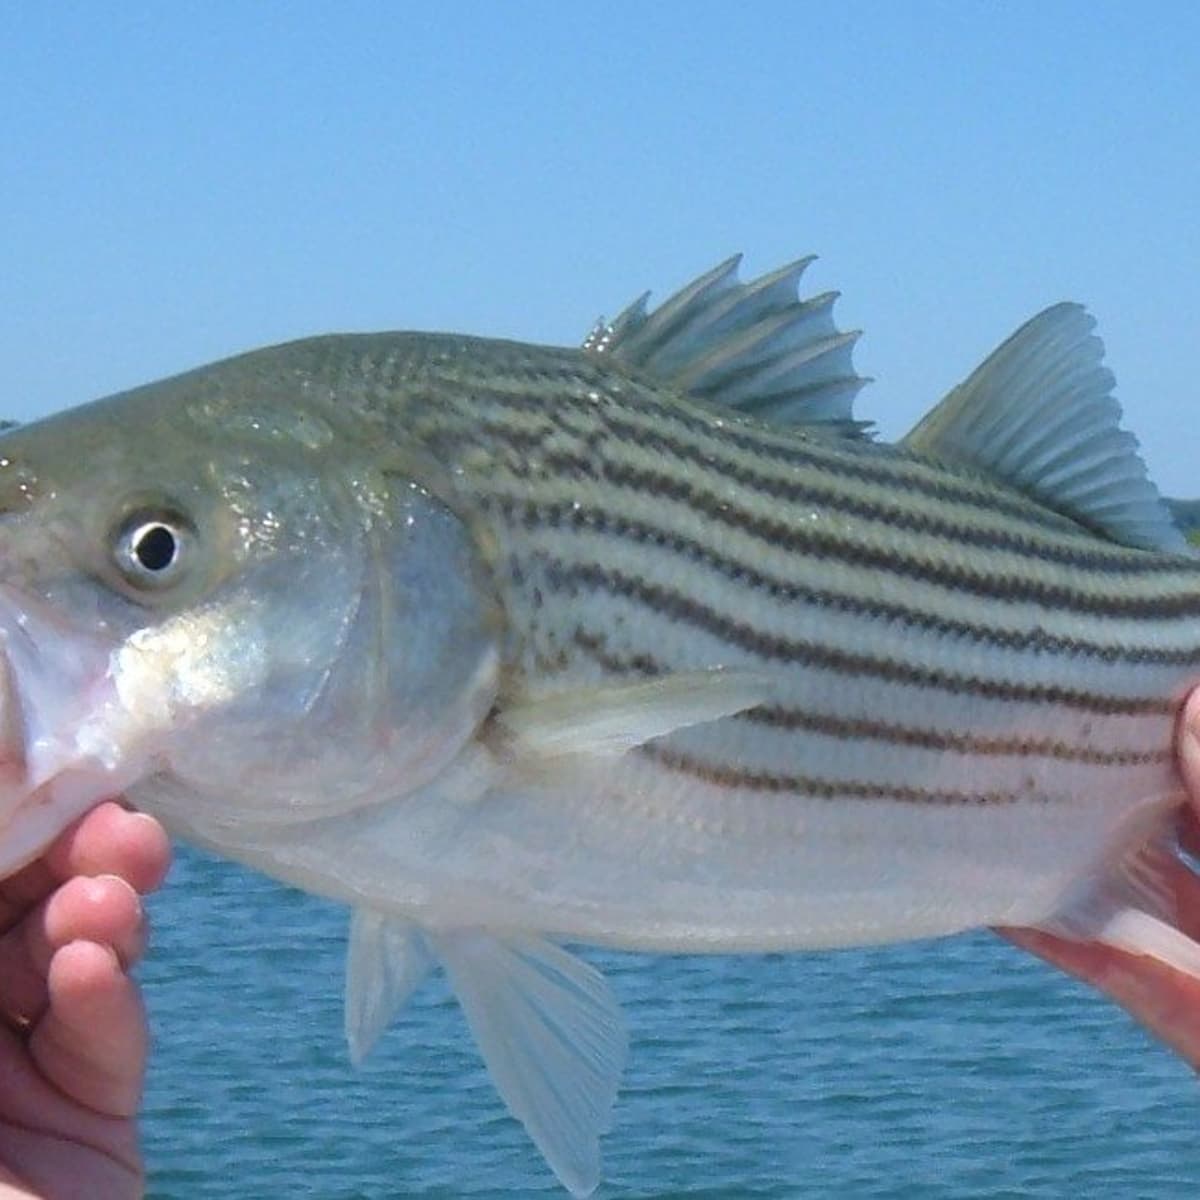 Catching Striped Bass With Sandworms - SkyAboveUs